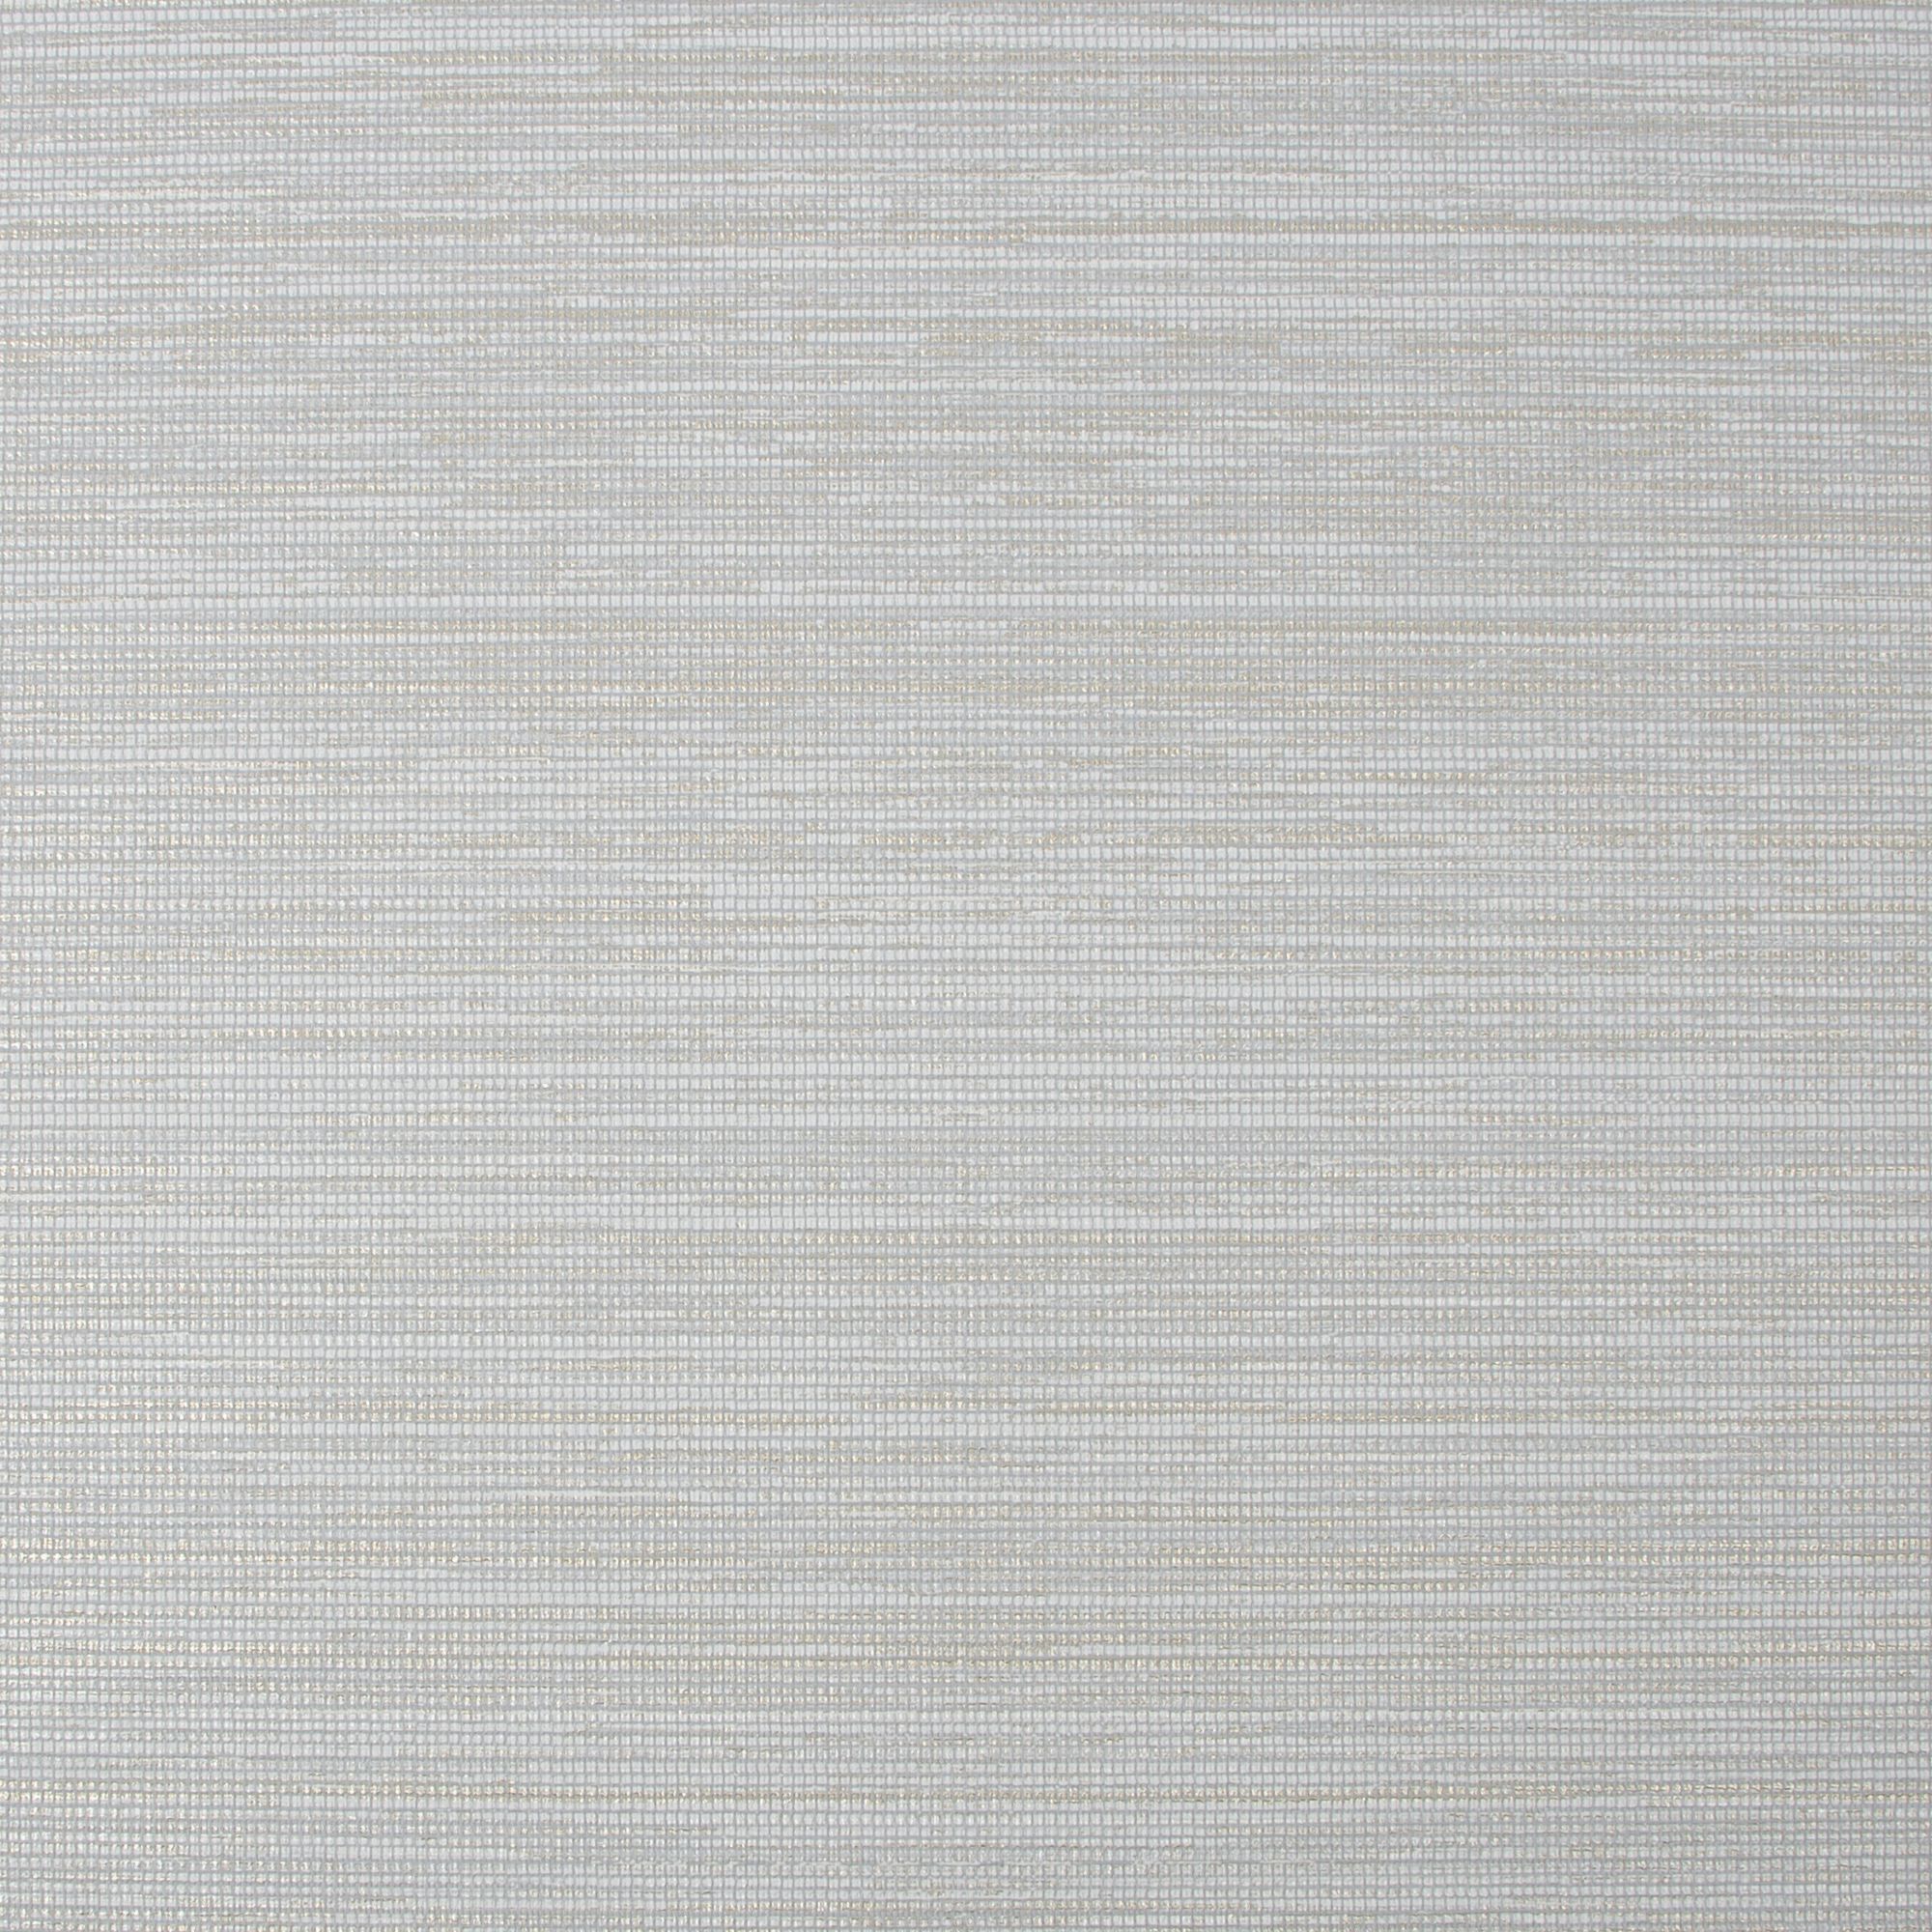 Boutique Gilded texture Moonstone Silver effect Grasscloth Textured Wallpaper Sample